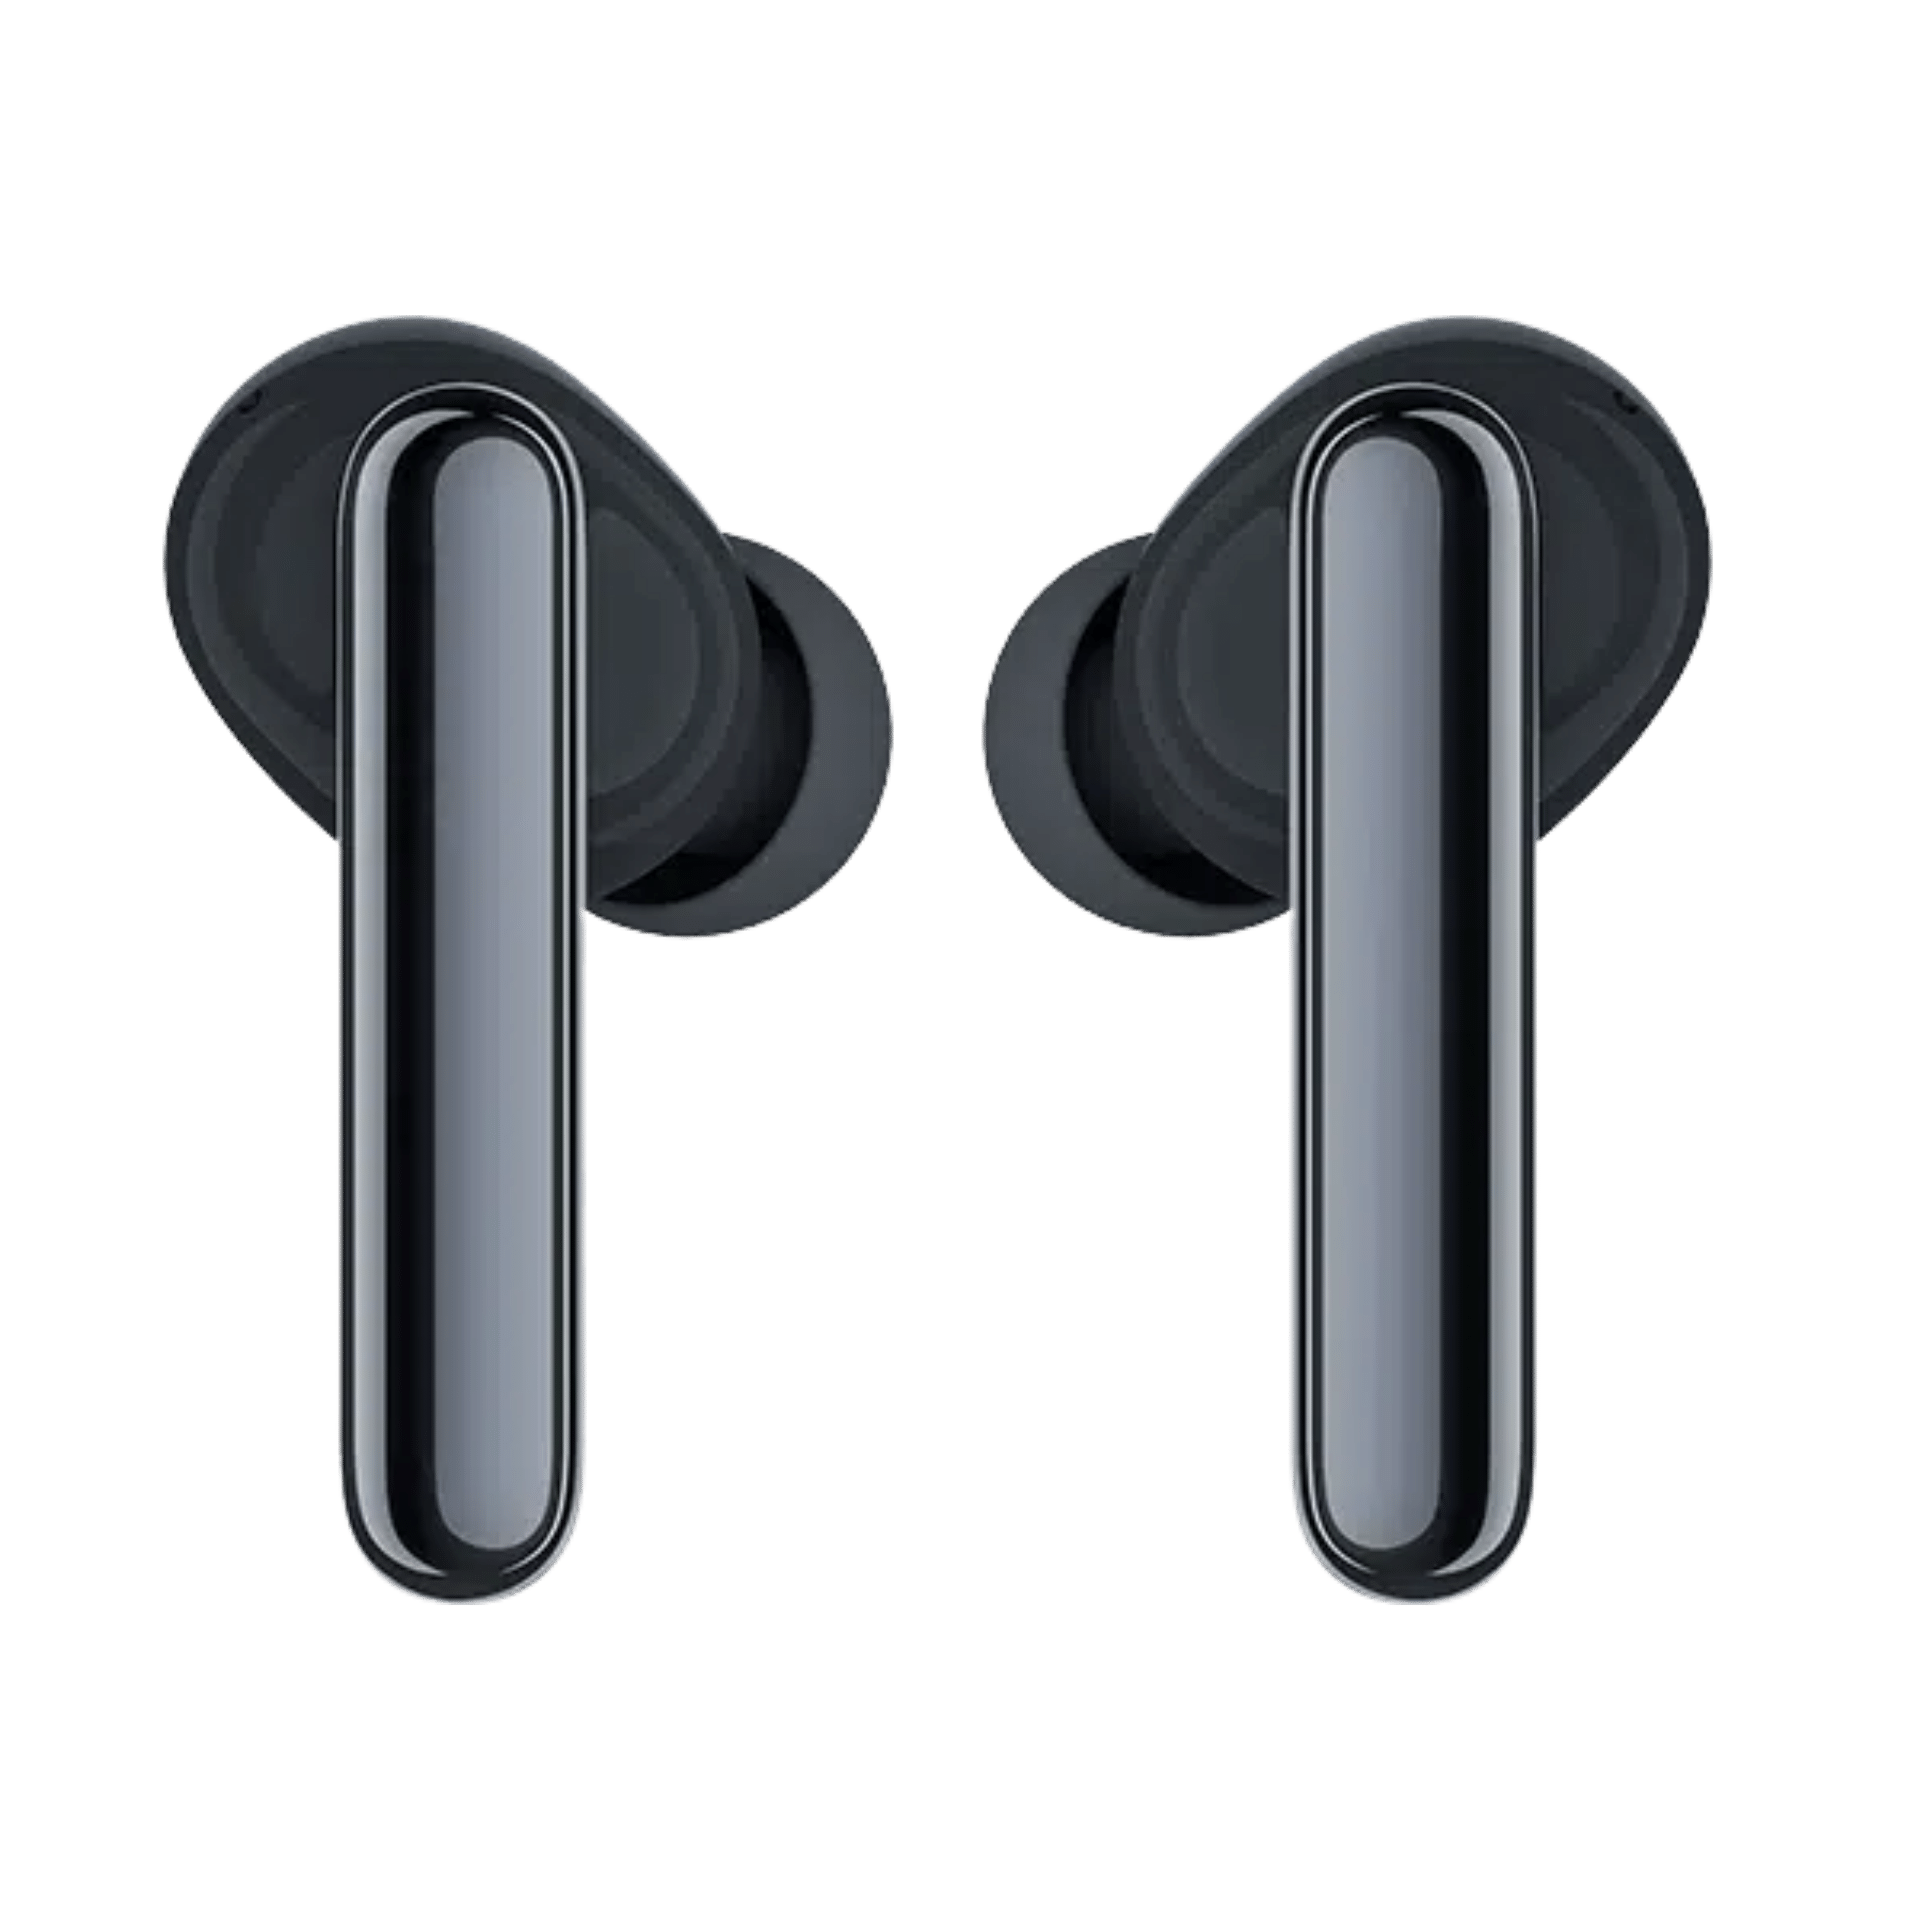 Product Image of TCL MOVEAUDIO S600 in Black